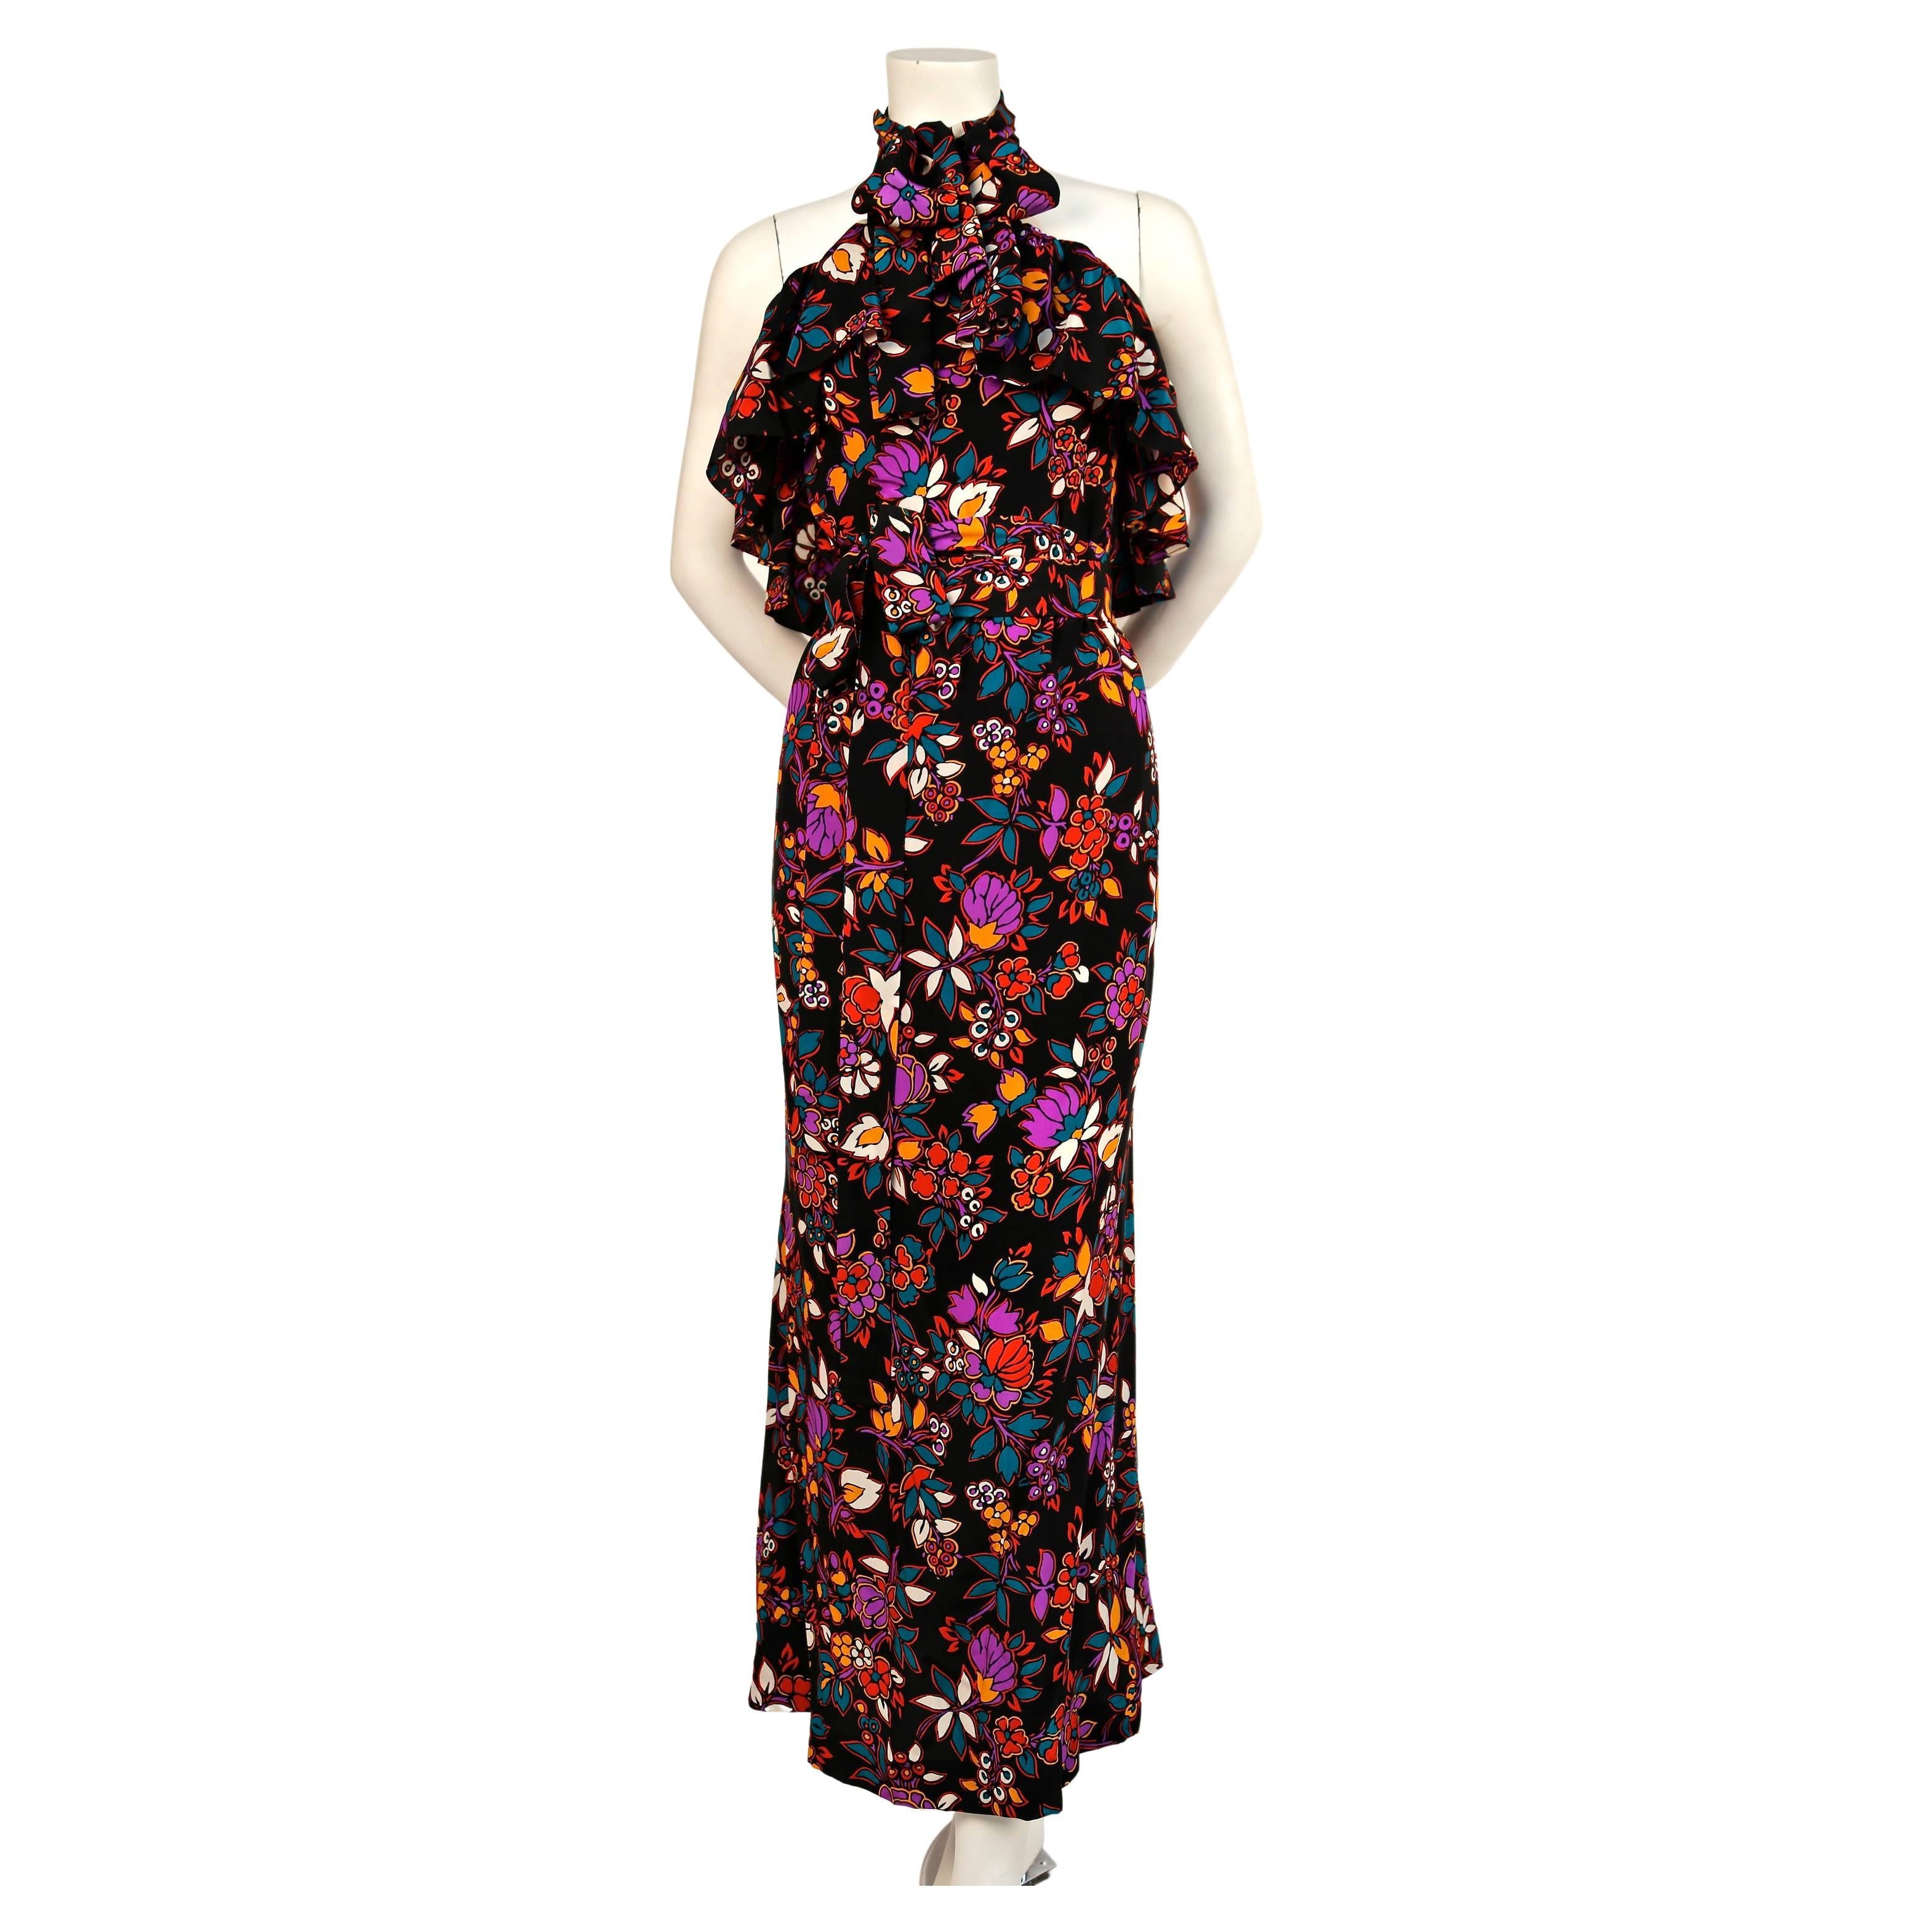 Very unusual, black floral printed silk dress with halter neck, flounce at bust and matching long sash from Yves Saint Laurent dating to the late 1970's. Halter neck can be tied at back of neck or worn with a bow in front. Labeled a French size 40